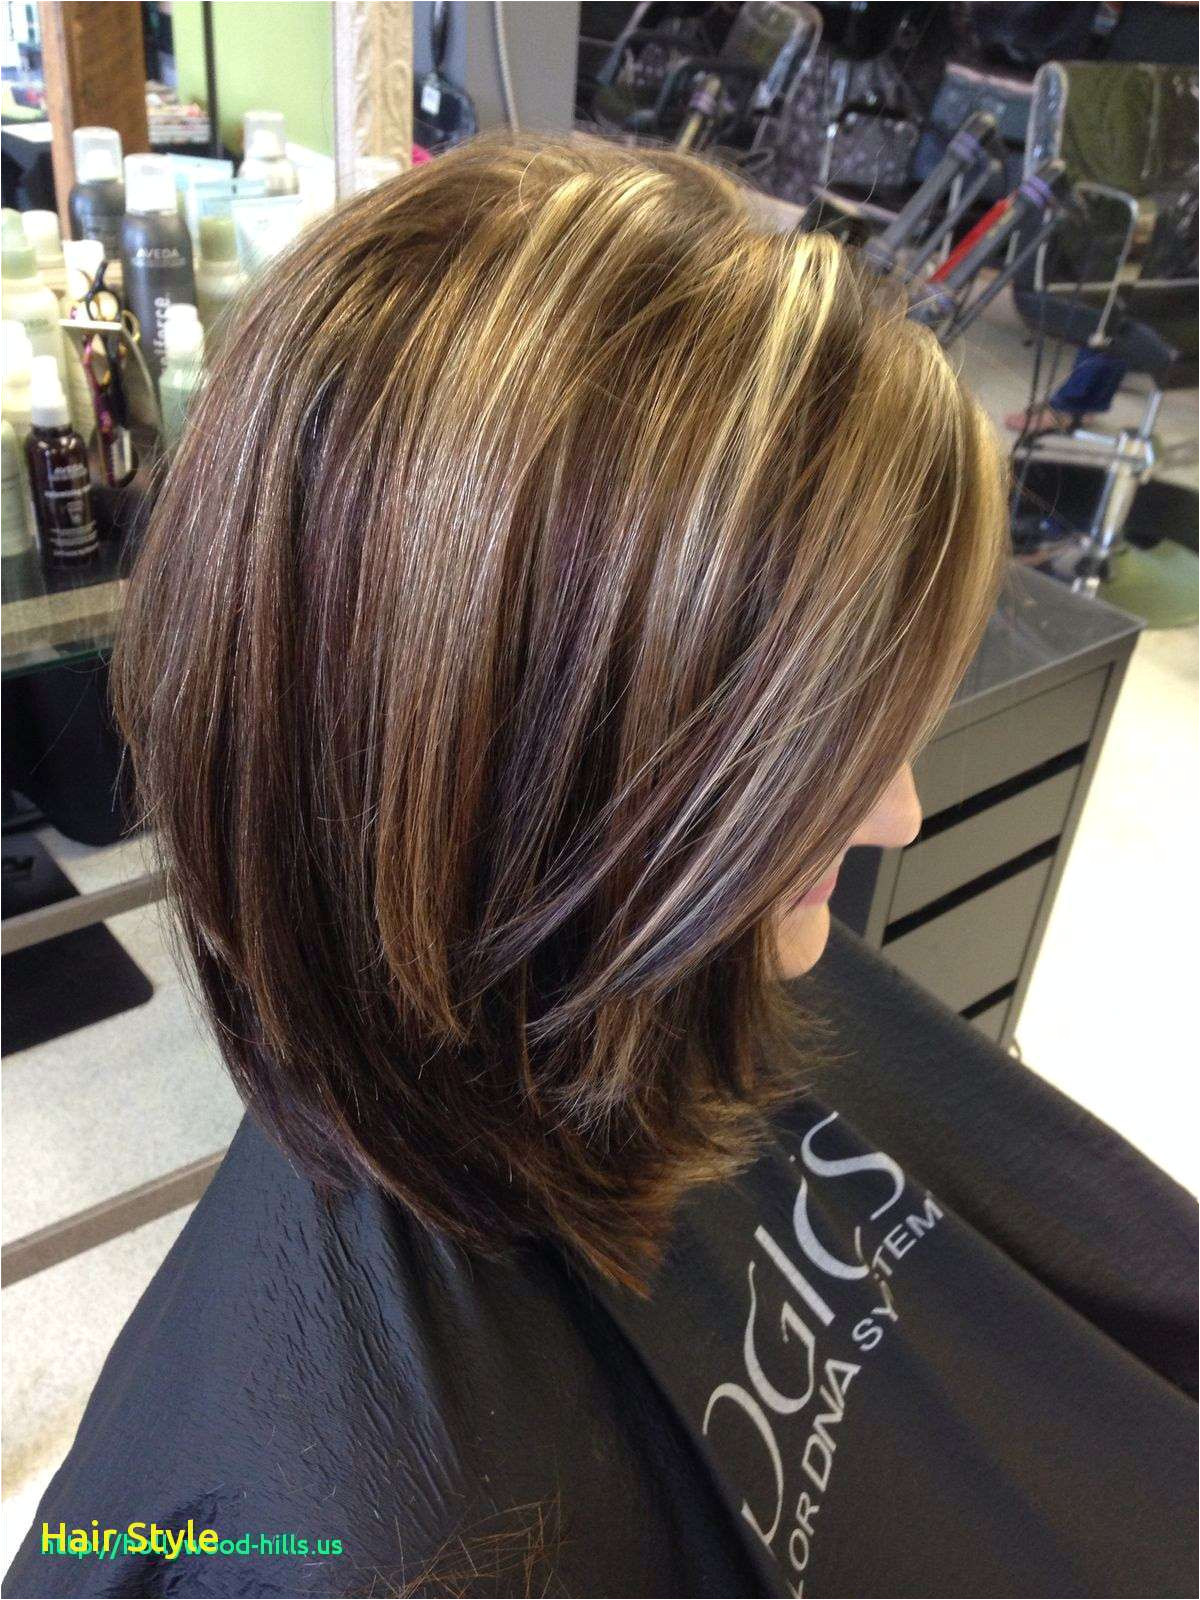 a line bob hairstyles 2016 unique bobs hairstyle new bob hairstyles gorgeous i pinimg 1200x 0d